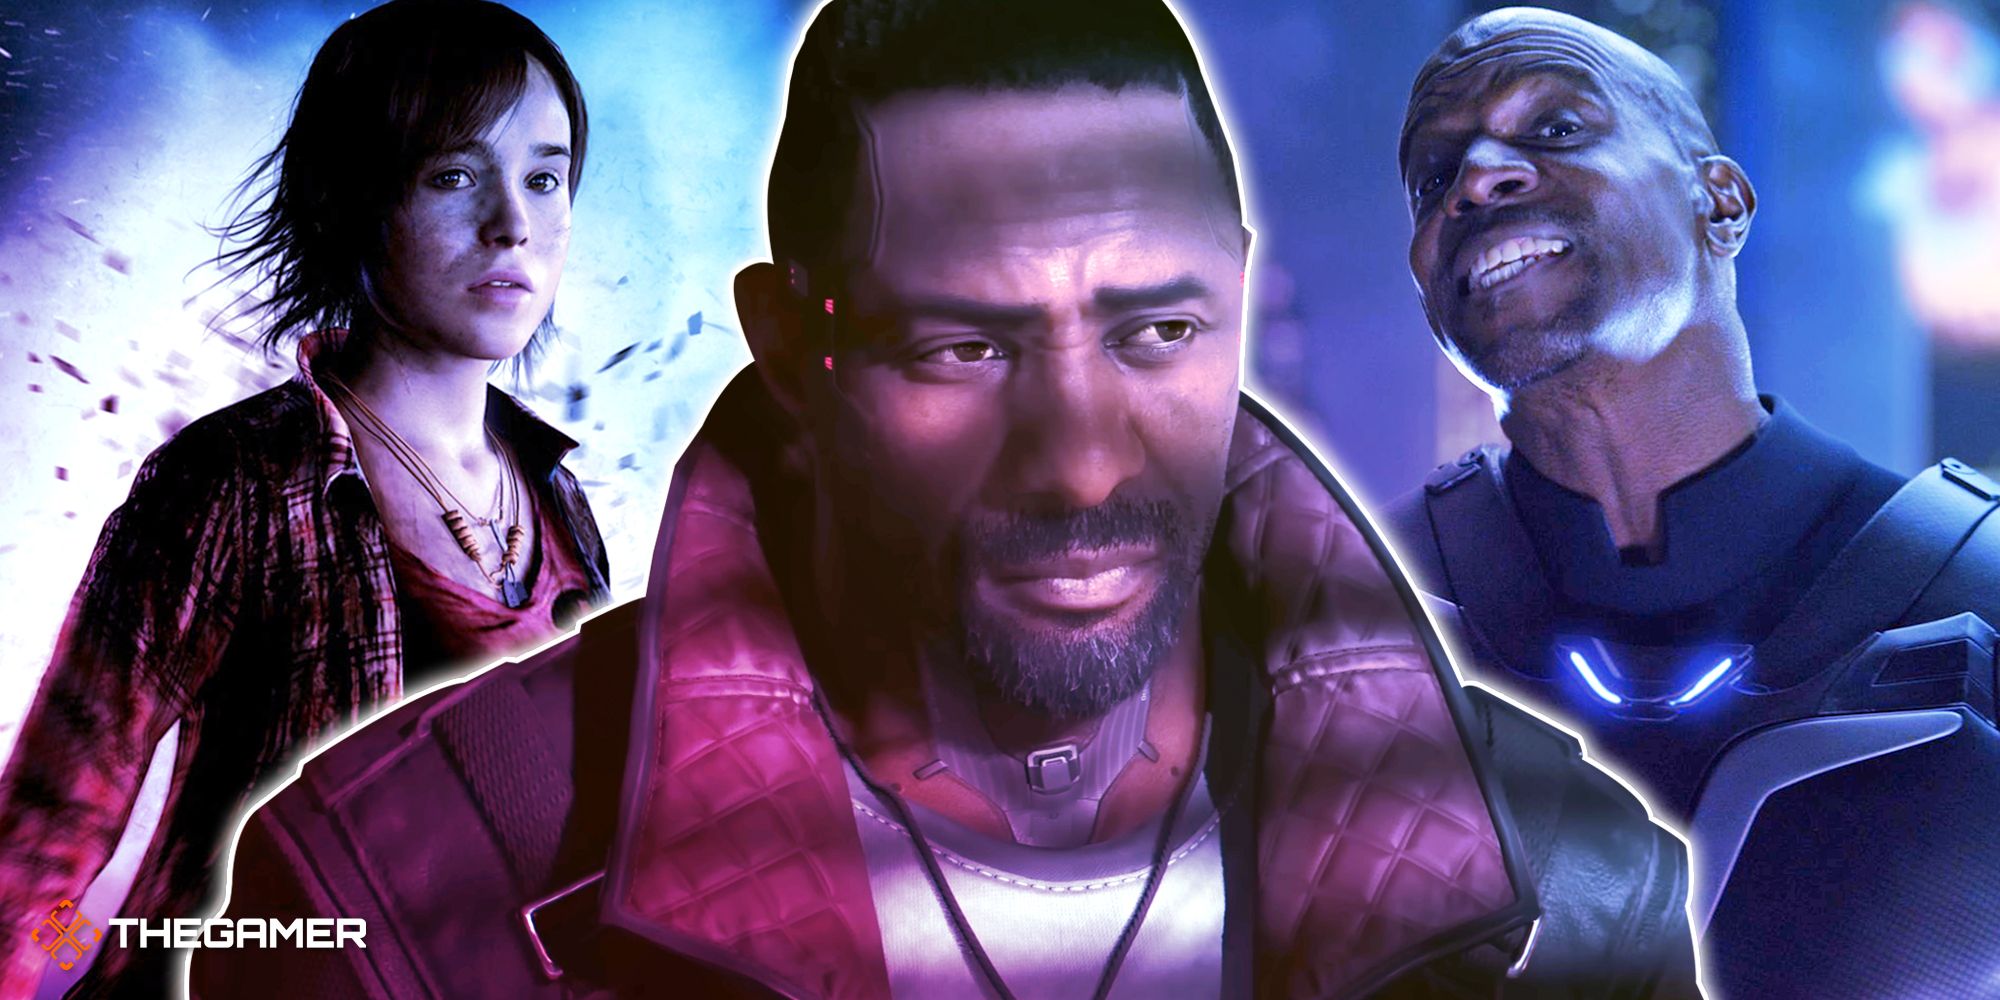 Game images from Beyond Two Souls, Cyberpunk 2077 and Crackdown 3.